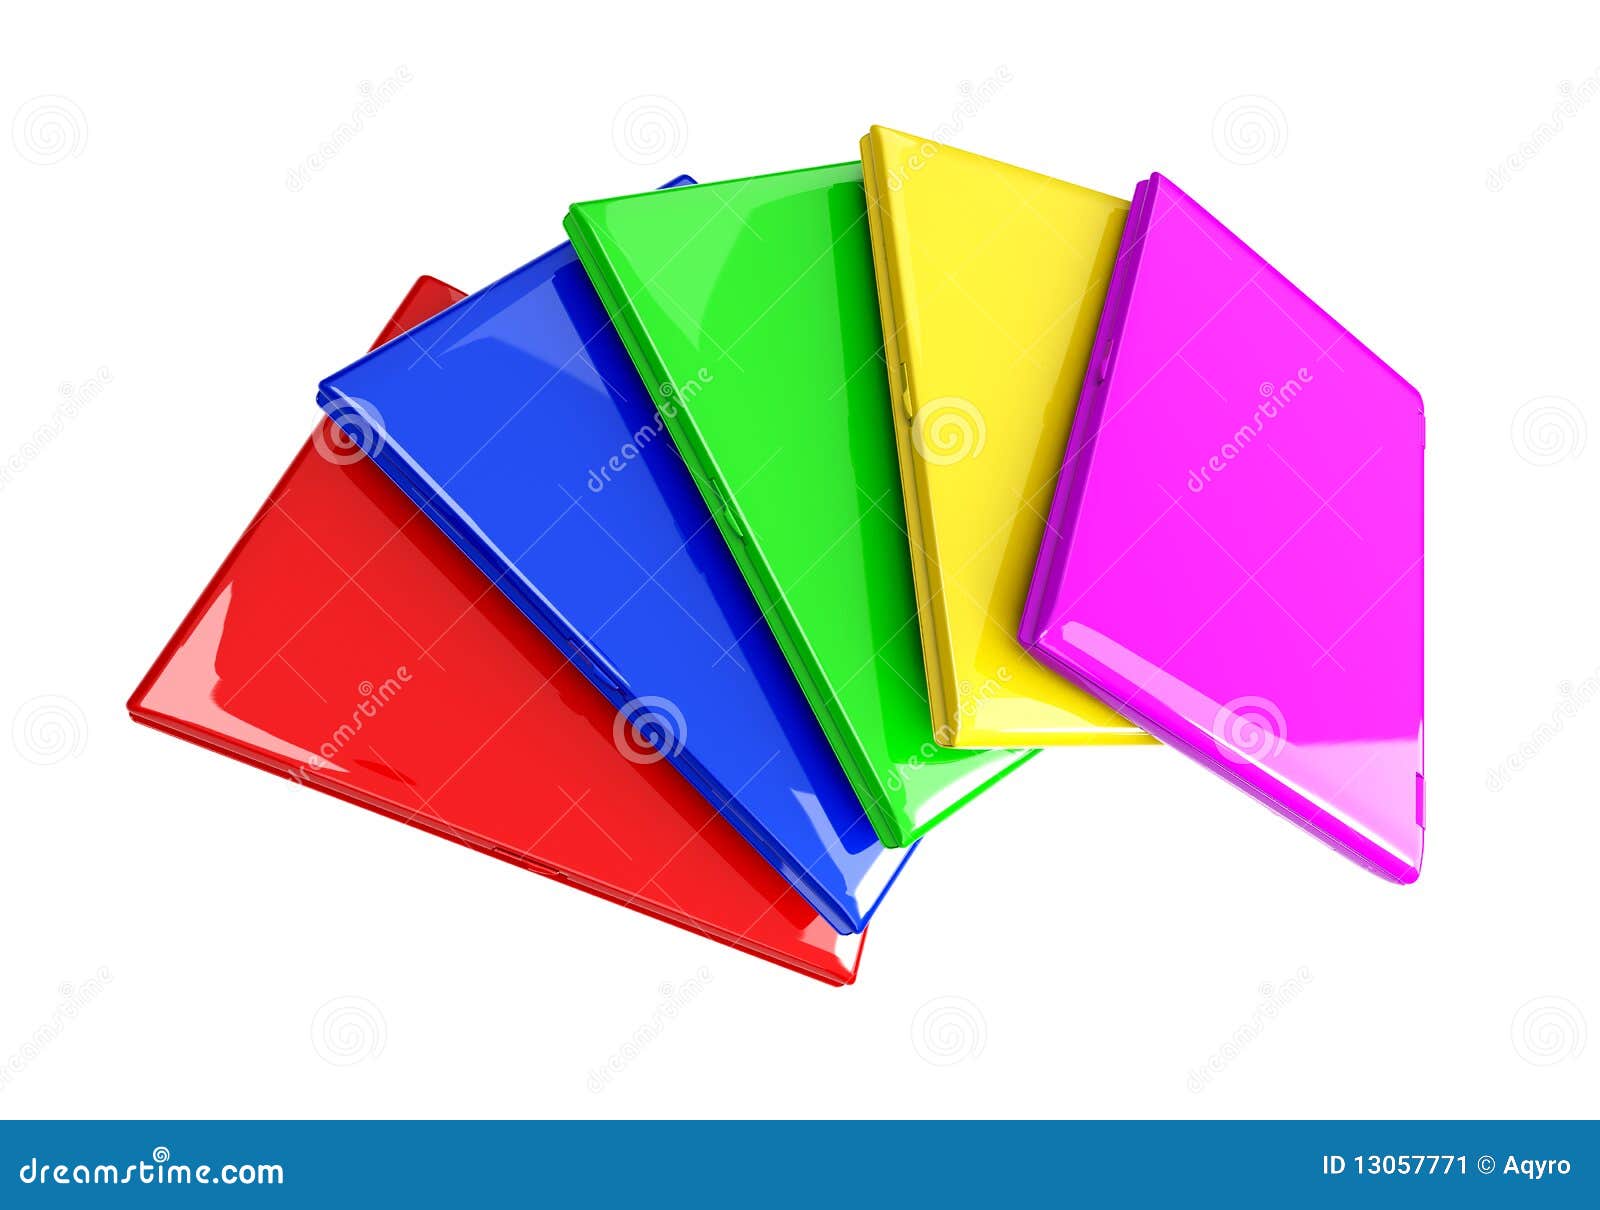 Colored Laptops 3d Model Stock Illustration Image Of Effy Moom Free Coloring Picture wallpaper give a chance to color on the wall without getting in trouble! Fill the walls of your home or office with stress-relieving [effymoom.blogspot.com]